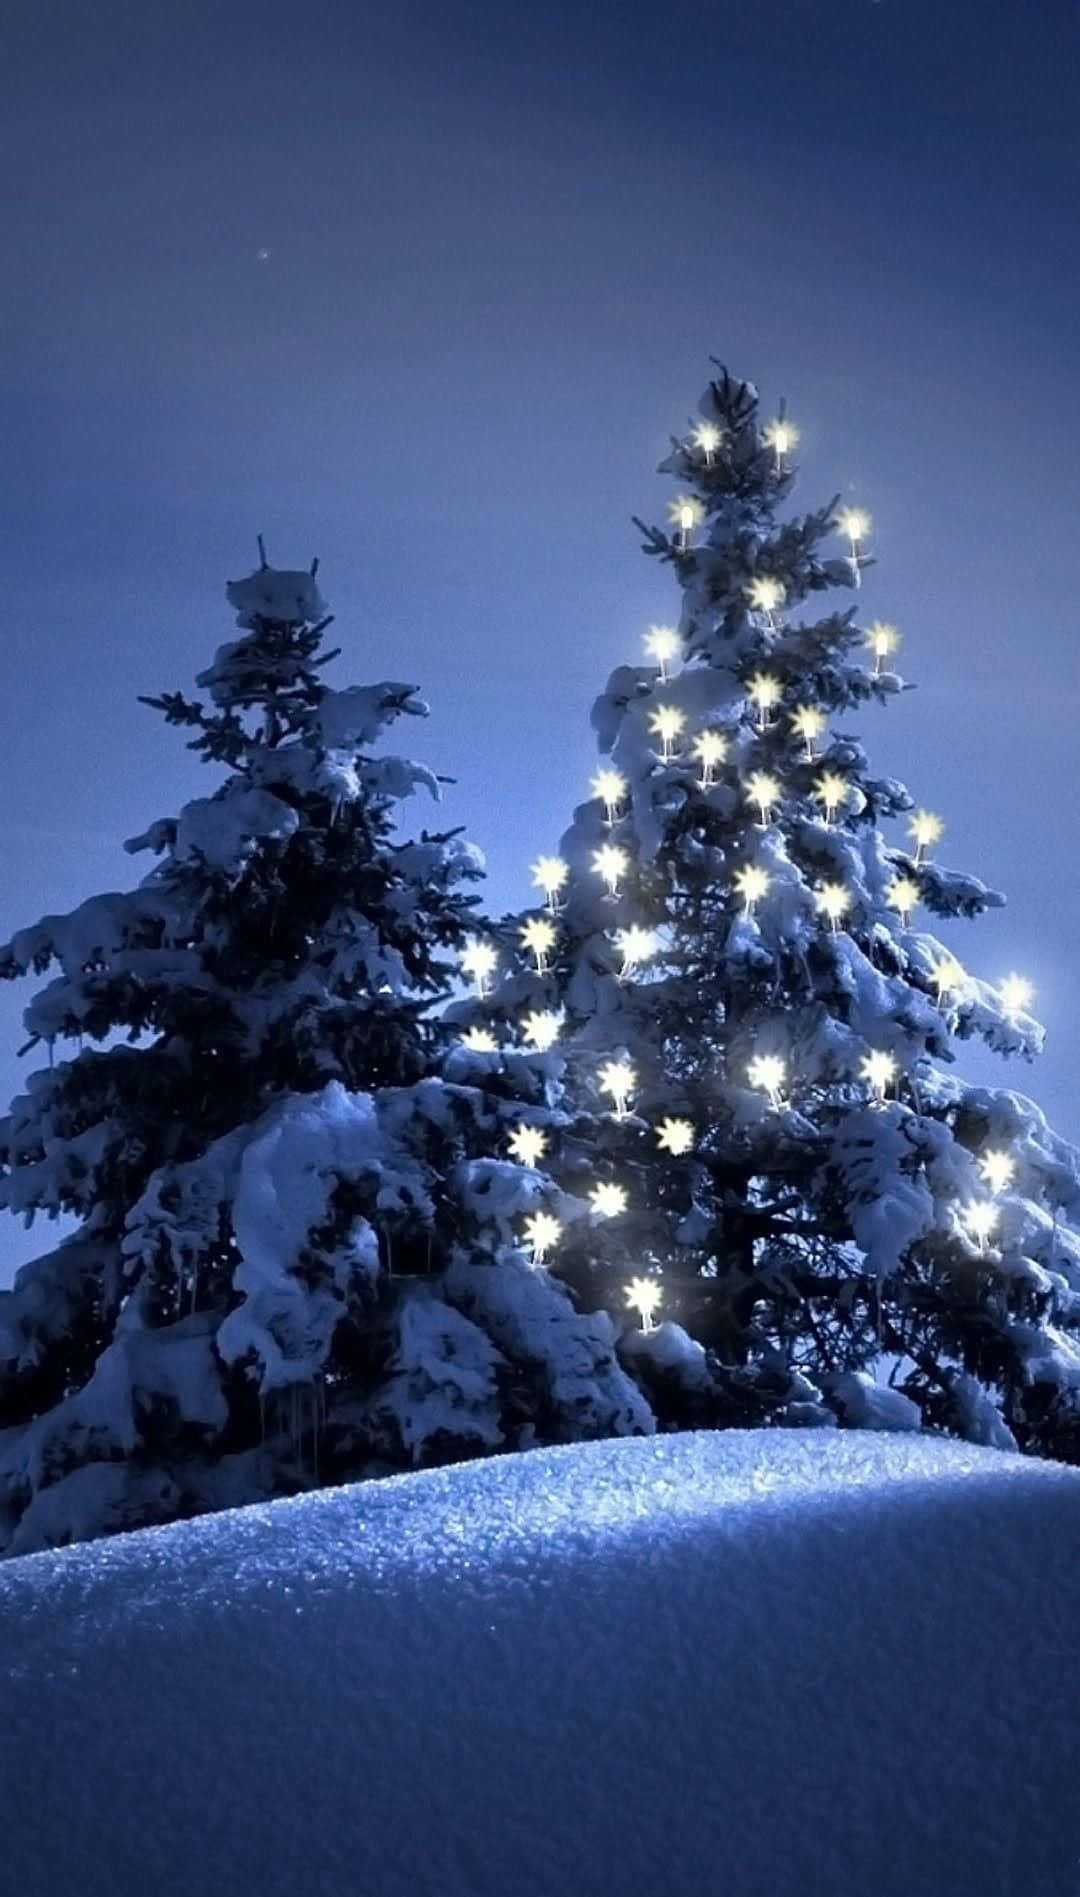 A winter wonderland with snow-covered trees and lights. Wallpaper